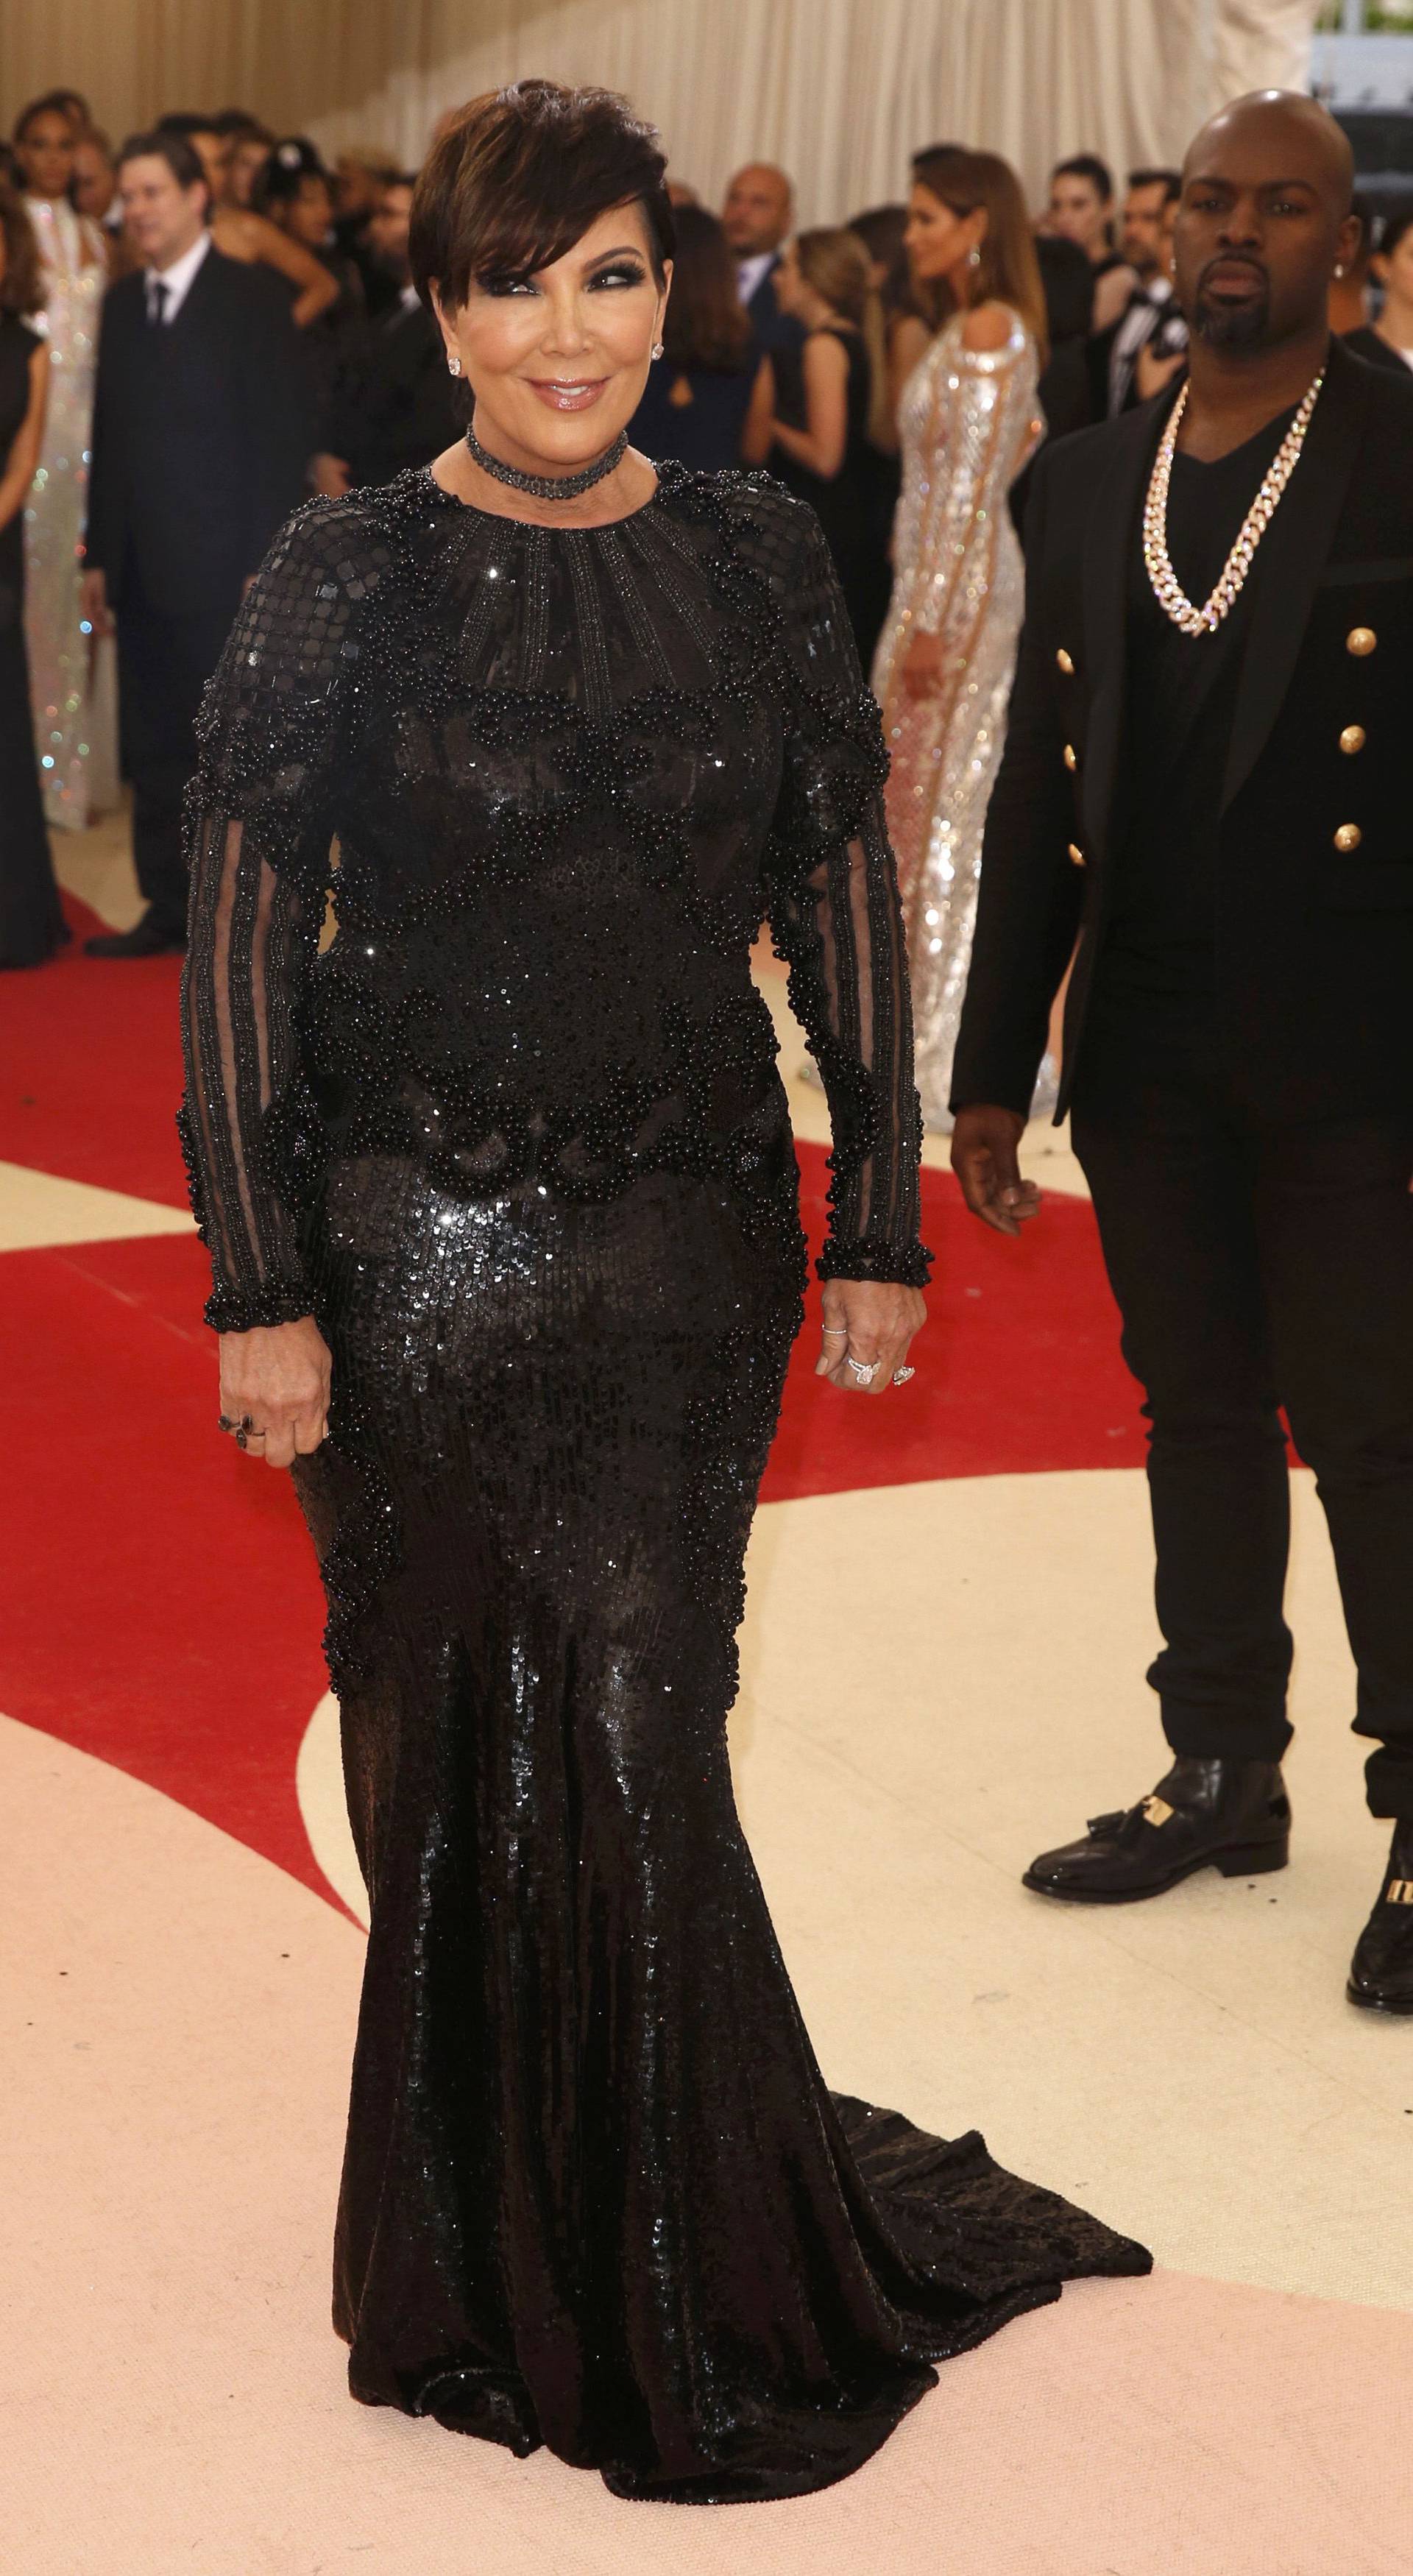 Kris Jenner and companion Gamble arrive at the Met Gala in New York